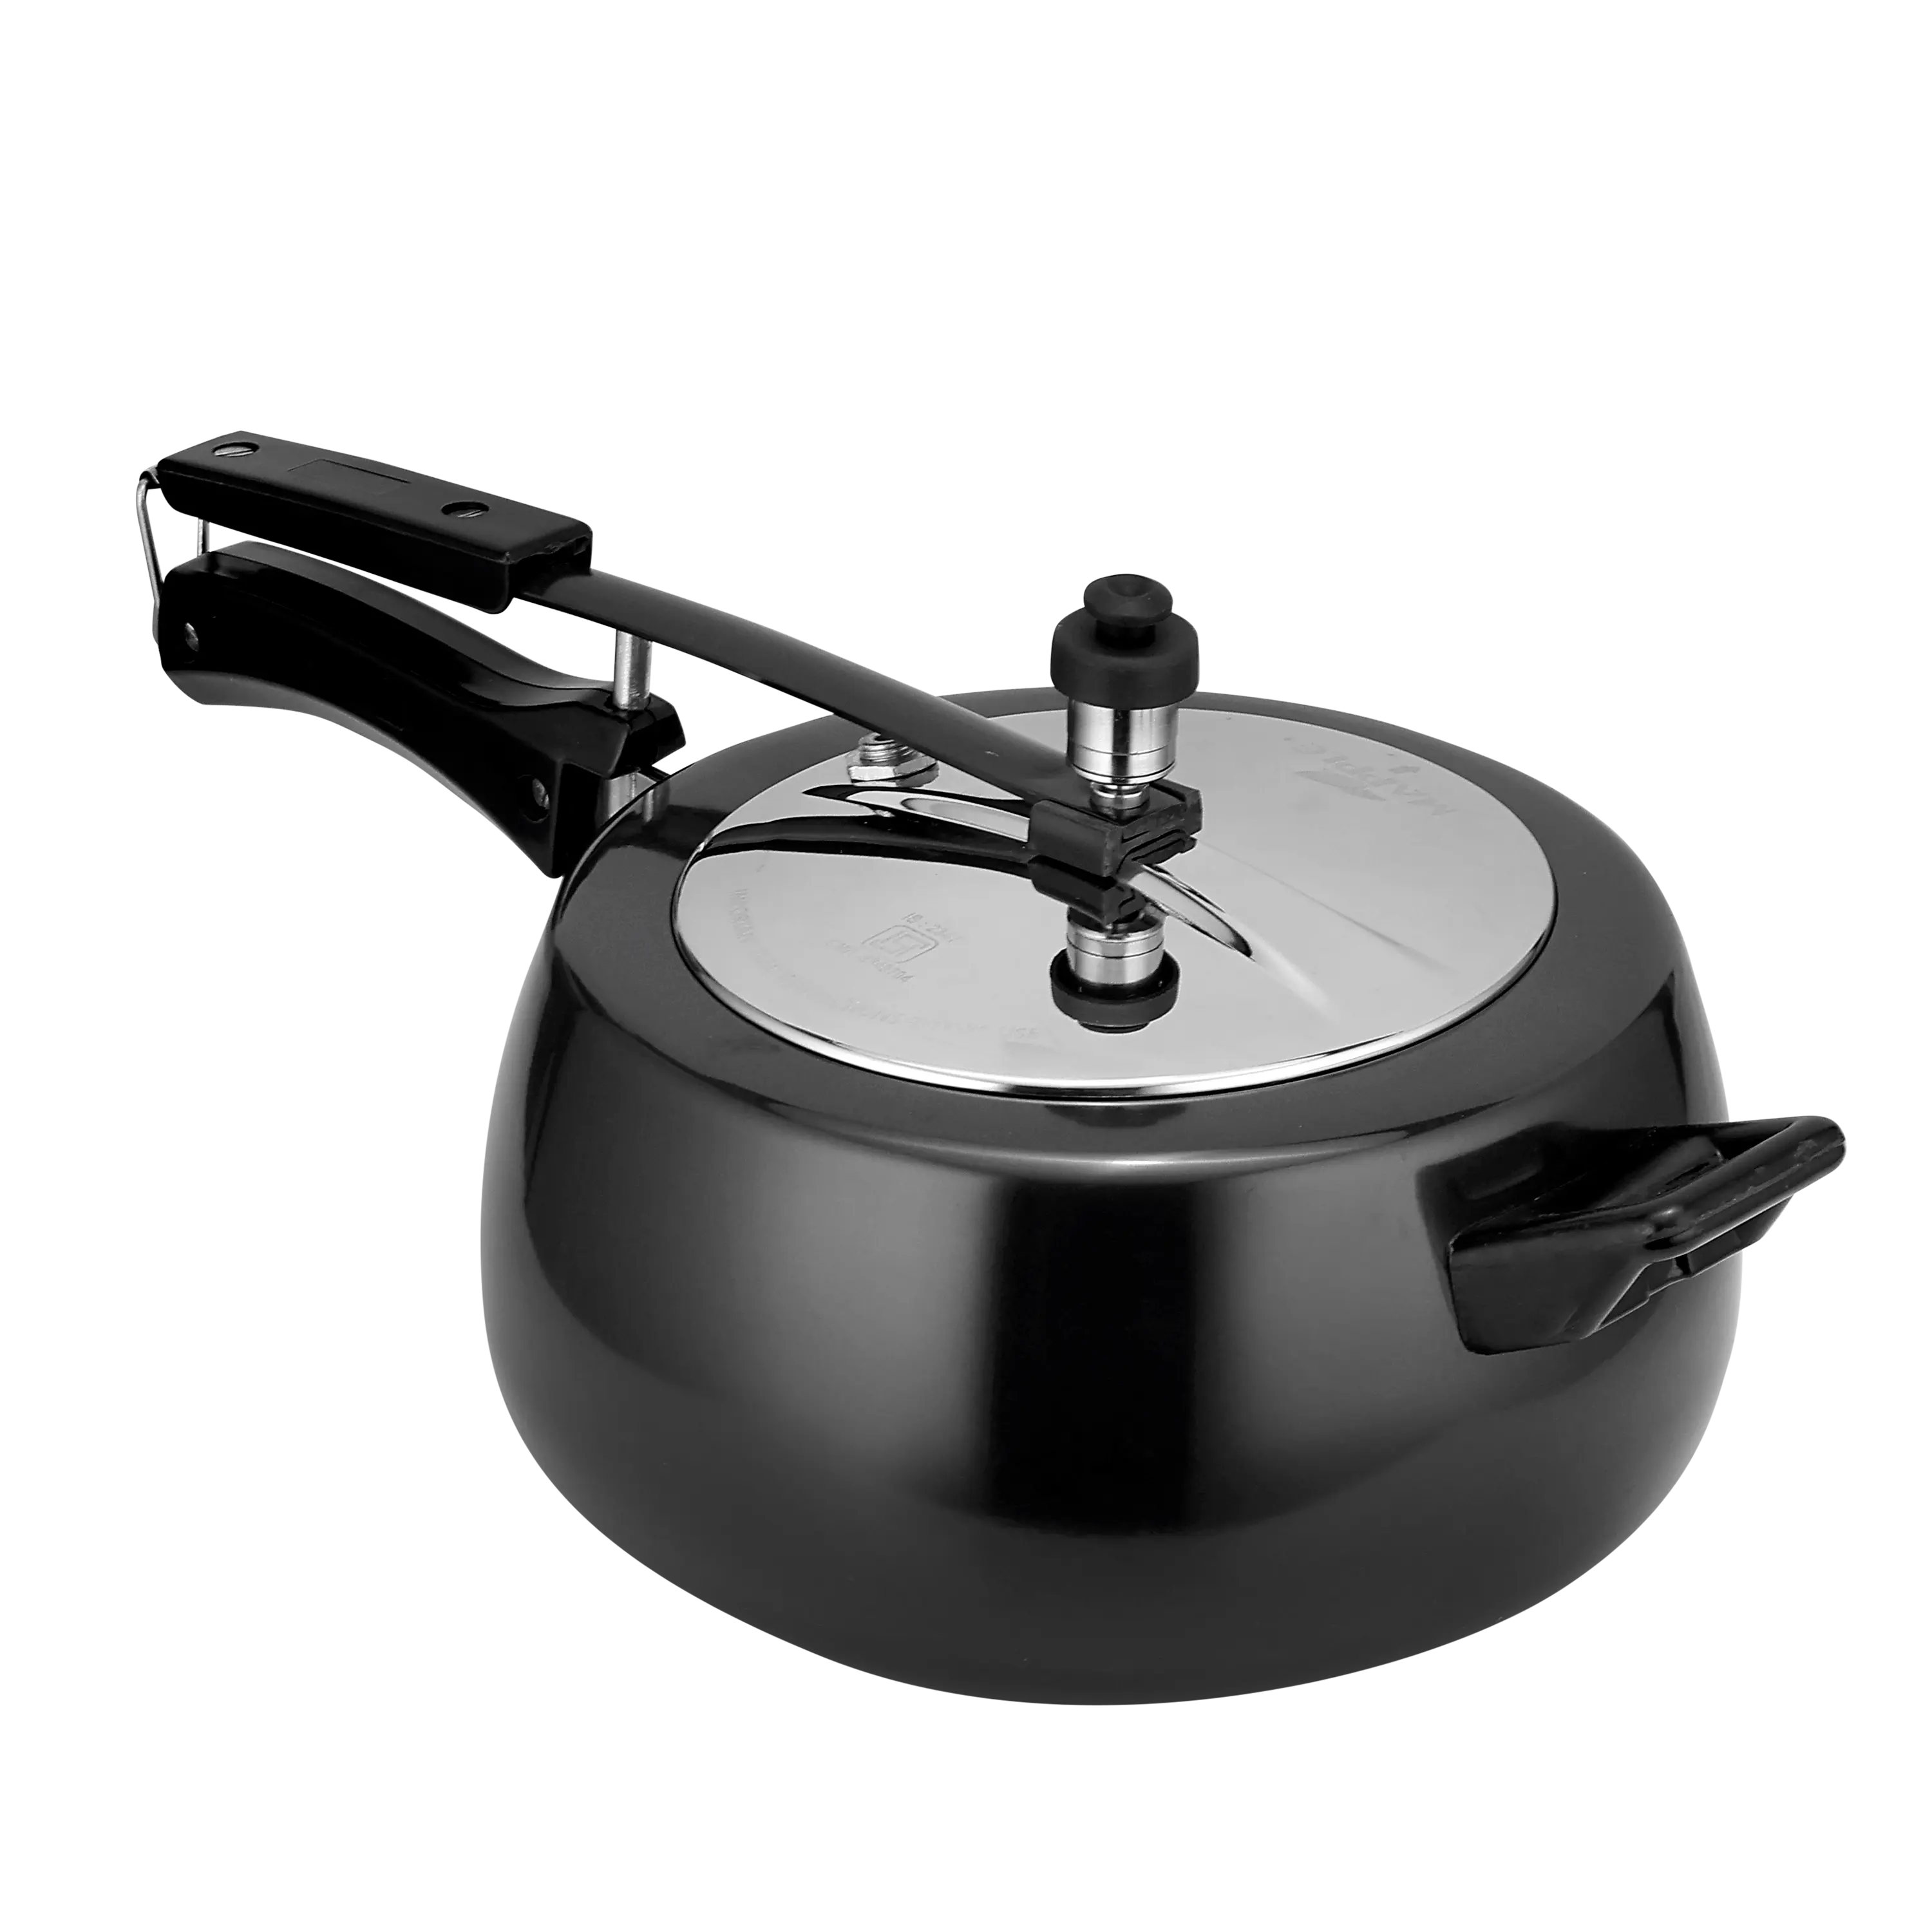 STAINLESS STEEL BLACK COOKER NON STICK - CROCKERY WALA AND COMPANY 